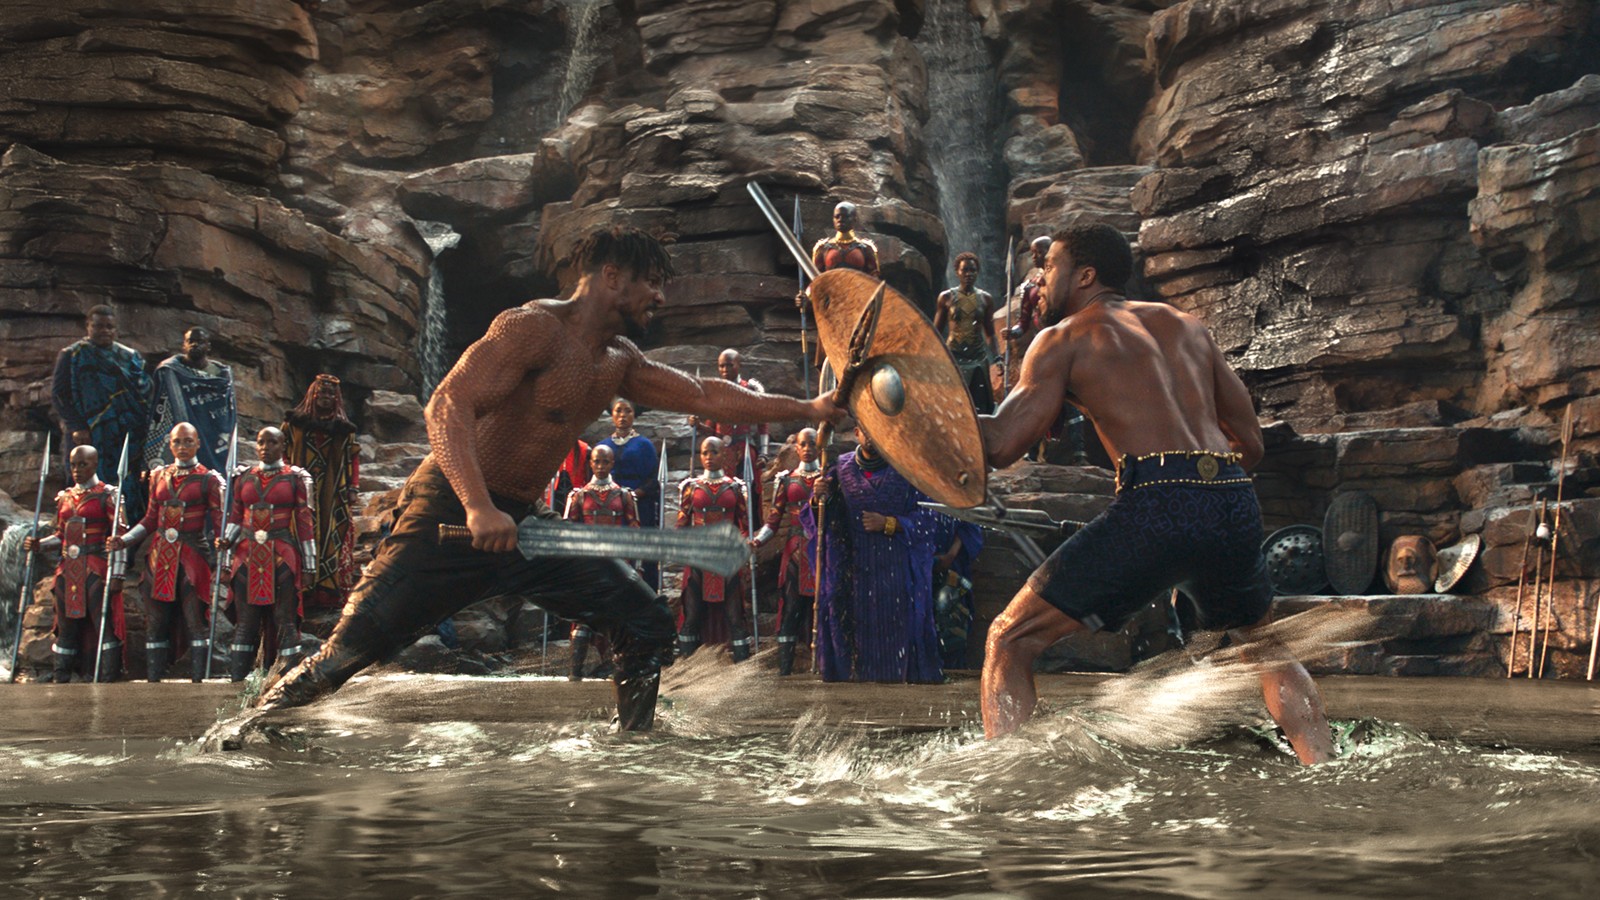 Revisiting 'Black Panther': The Waterfall Fight Scene Atlantic